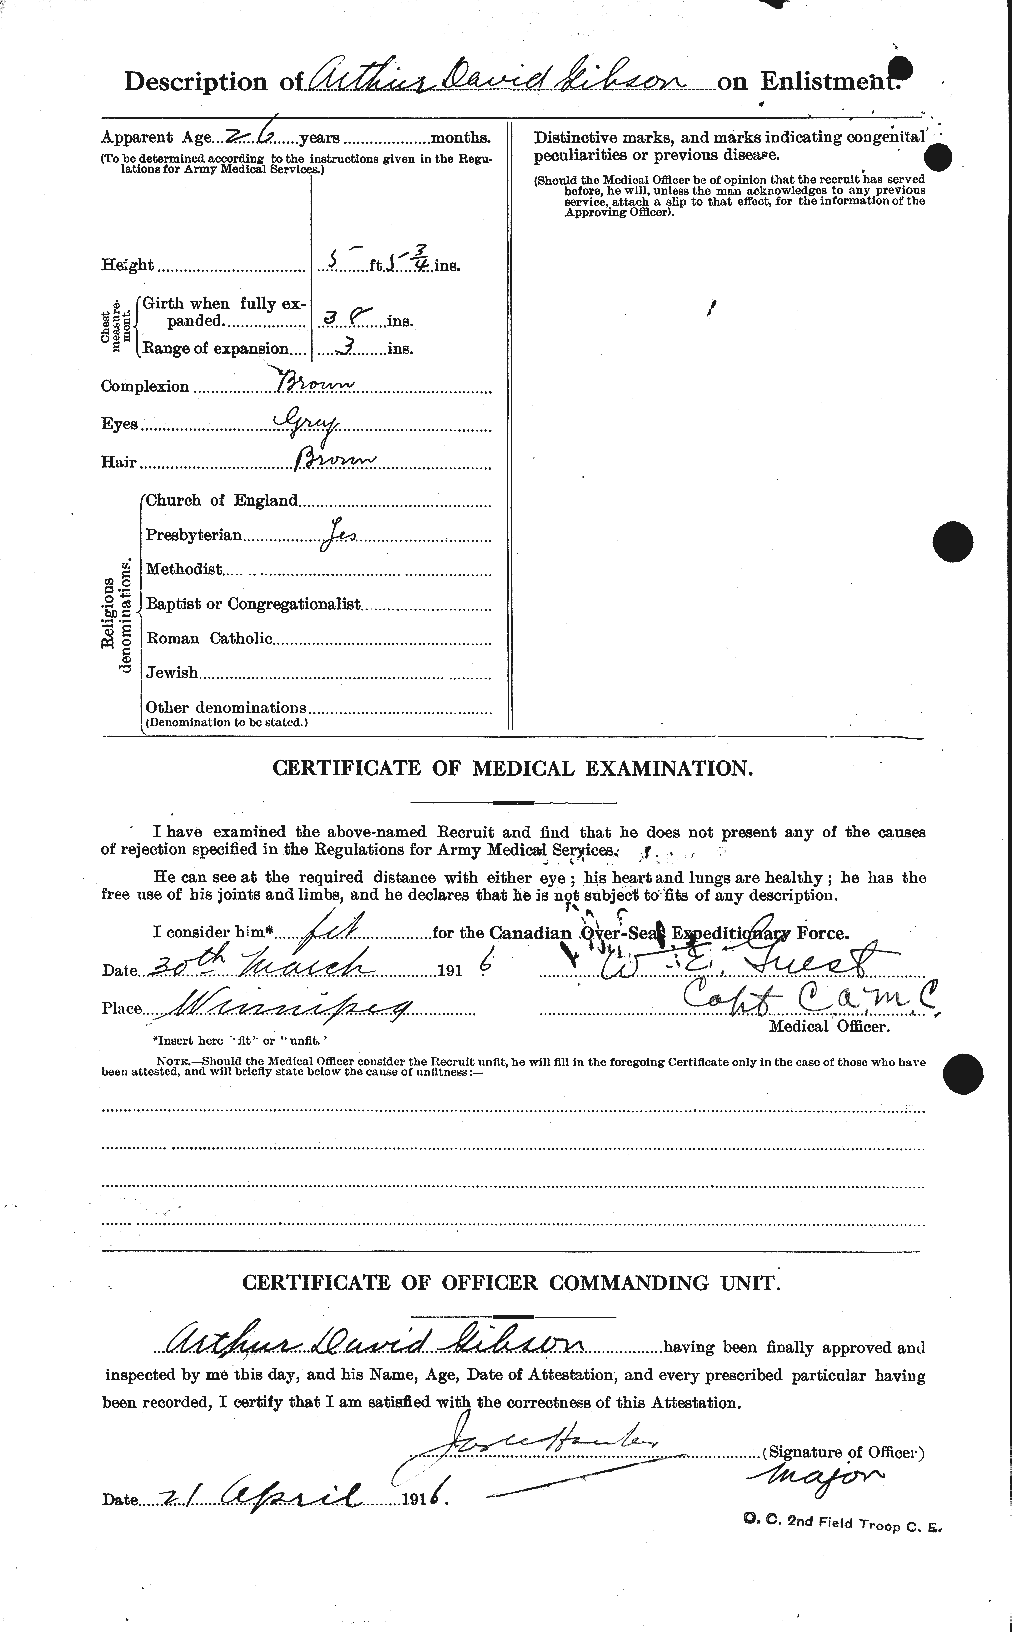 Personnel Records of the First World War - CEF 347180b